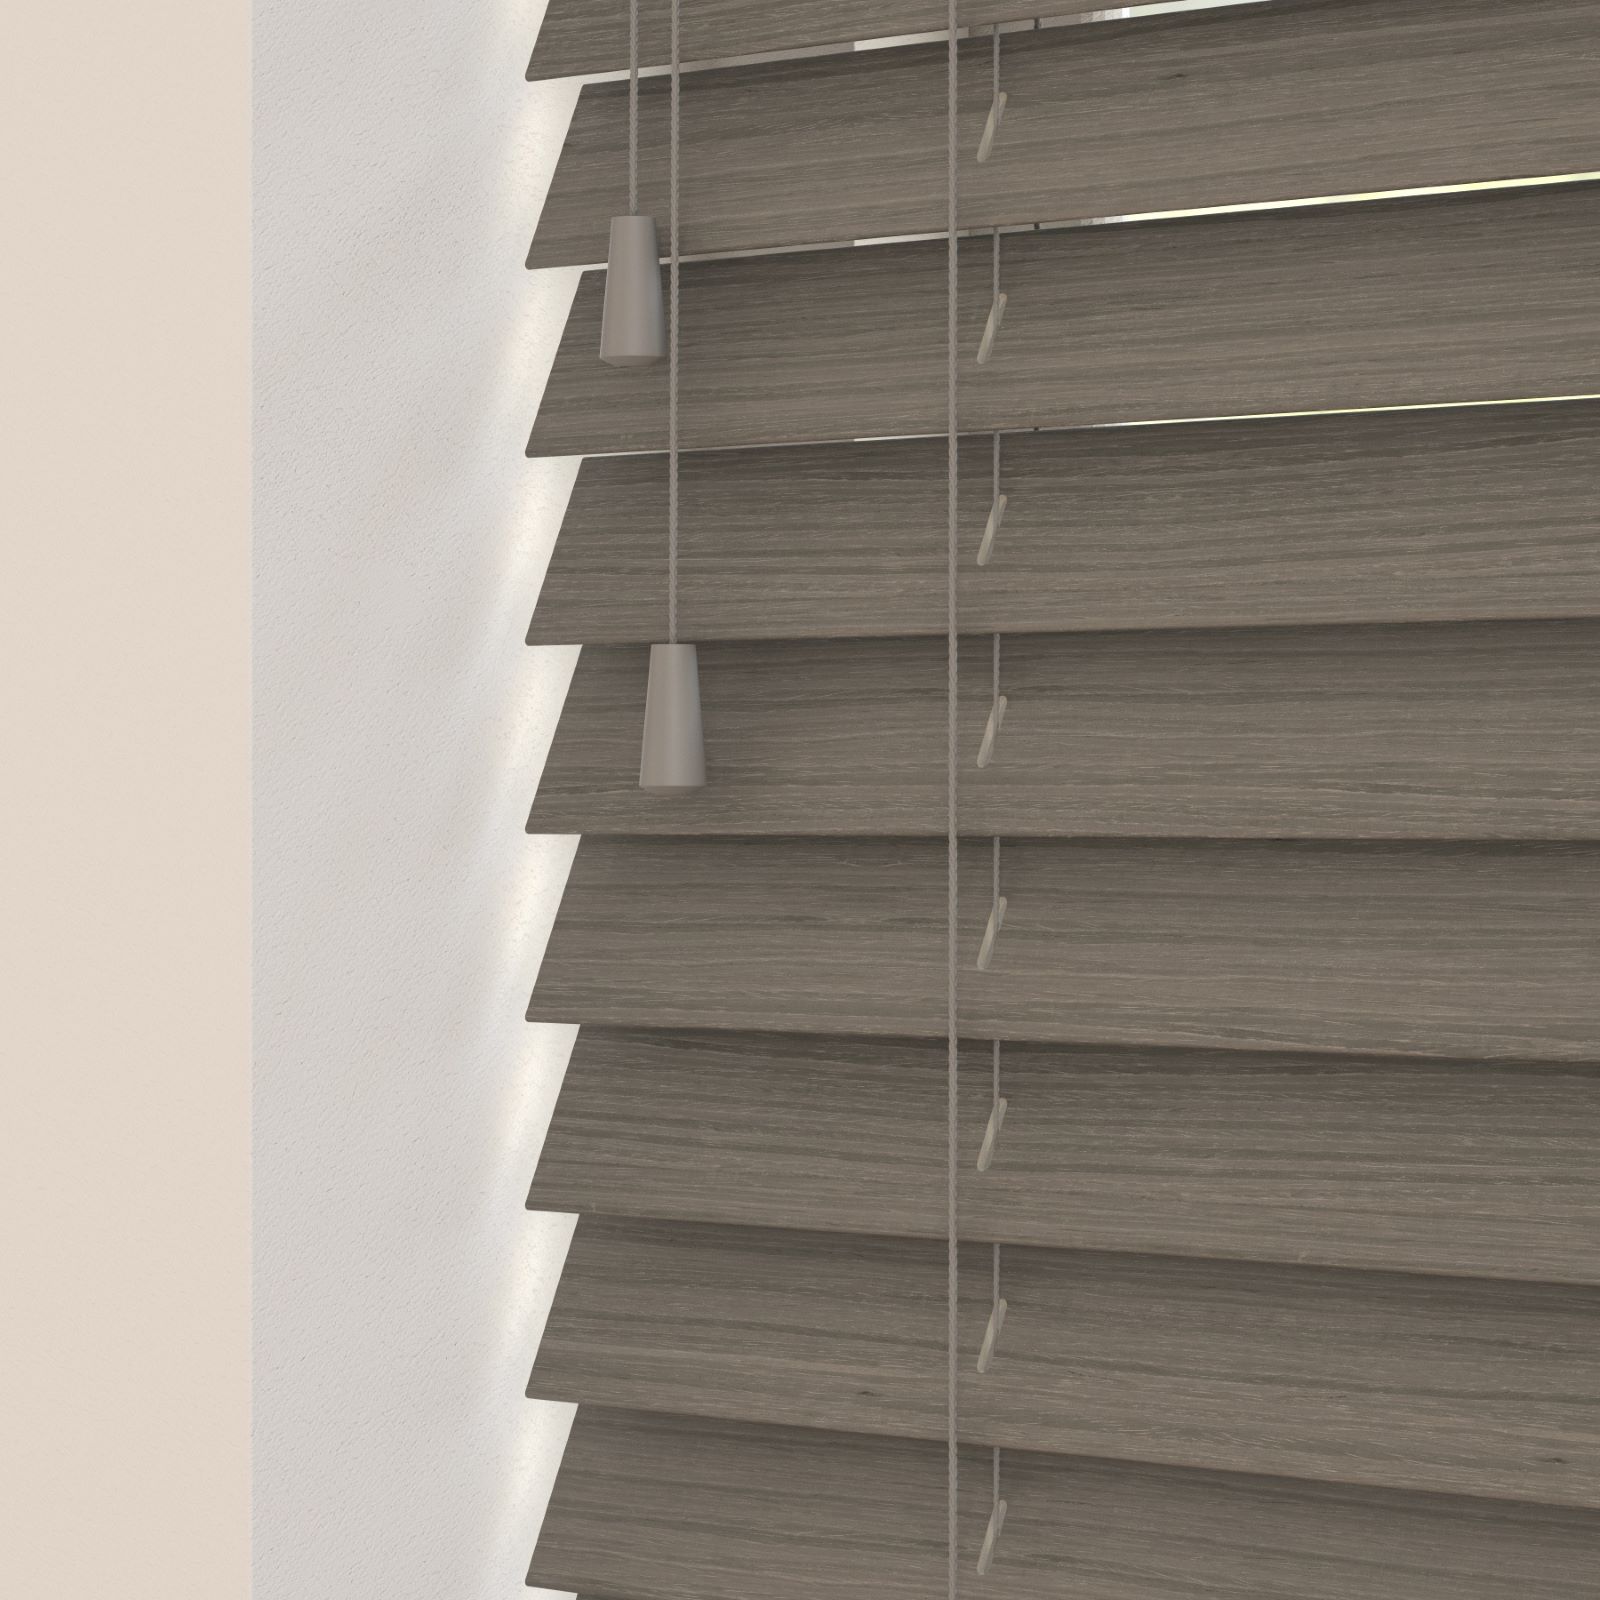 Suppliers of Stylish Venetian Blinds For Any Room UK